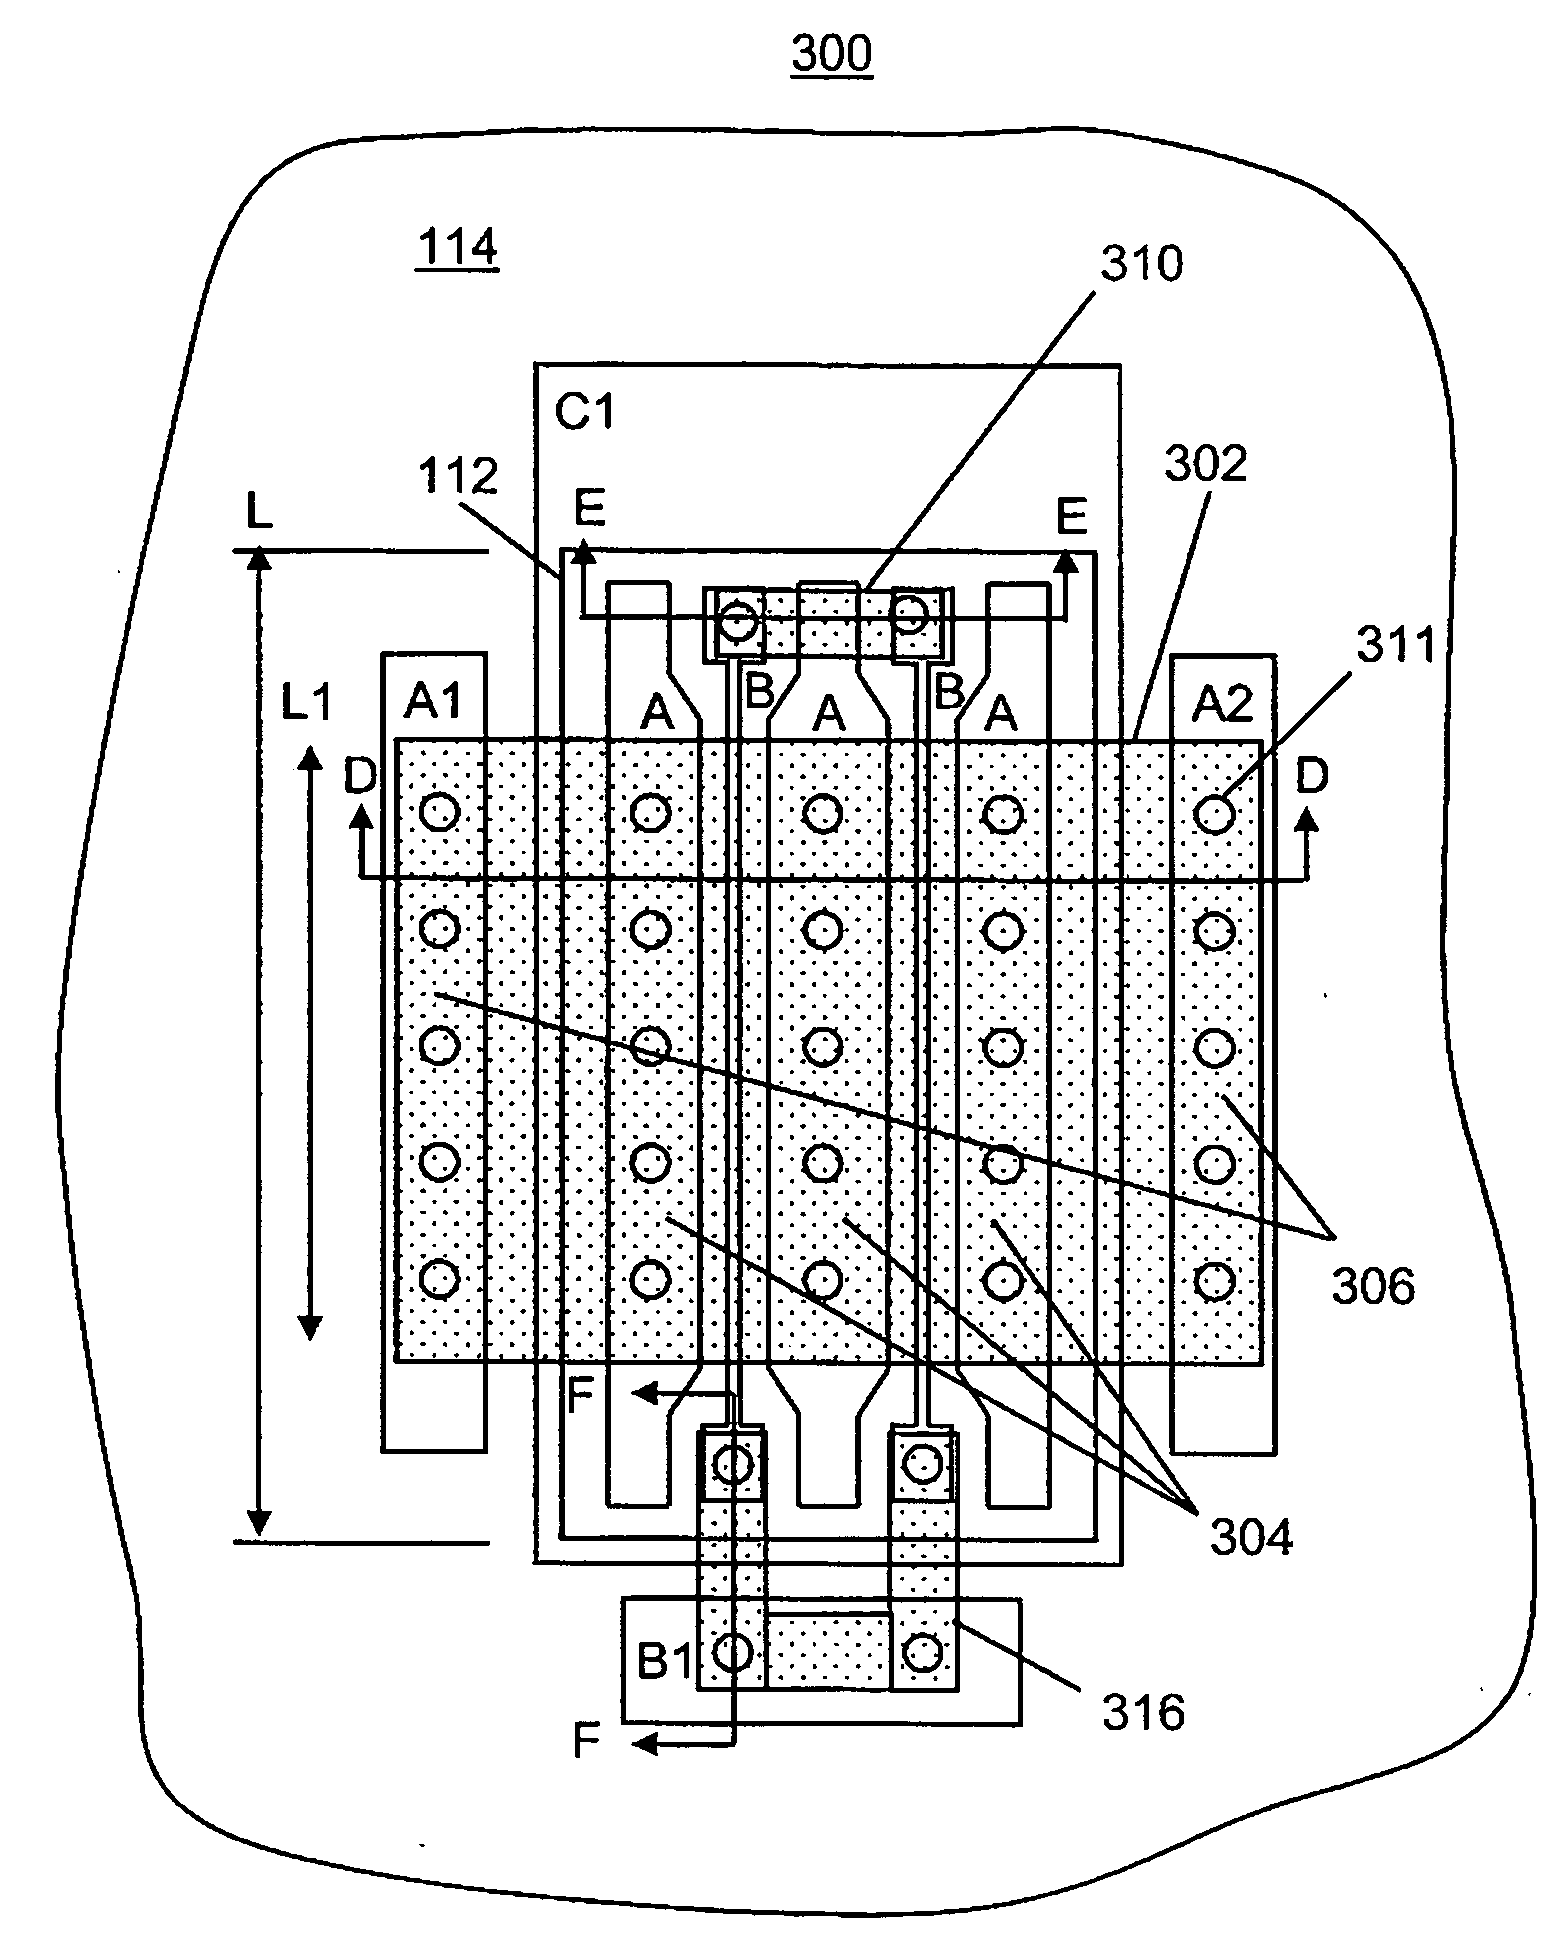 Metal foil interconnection of electrical devices